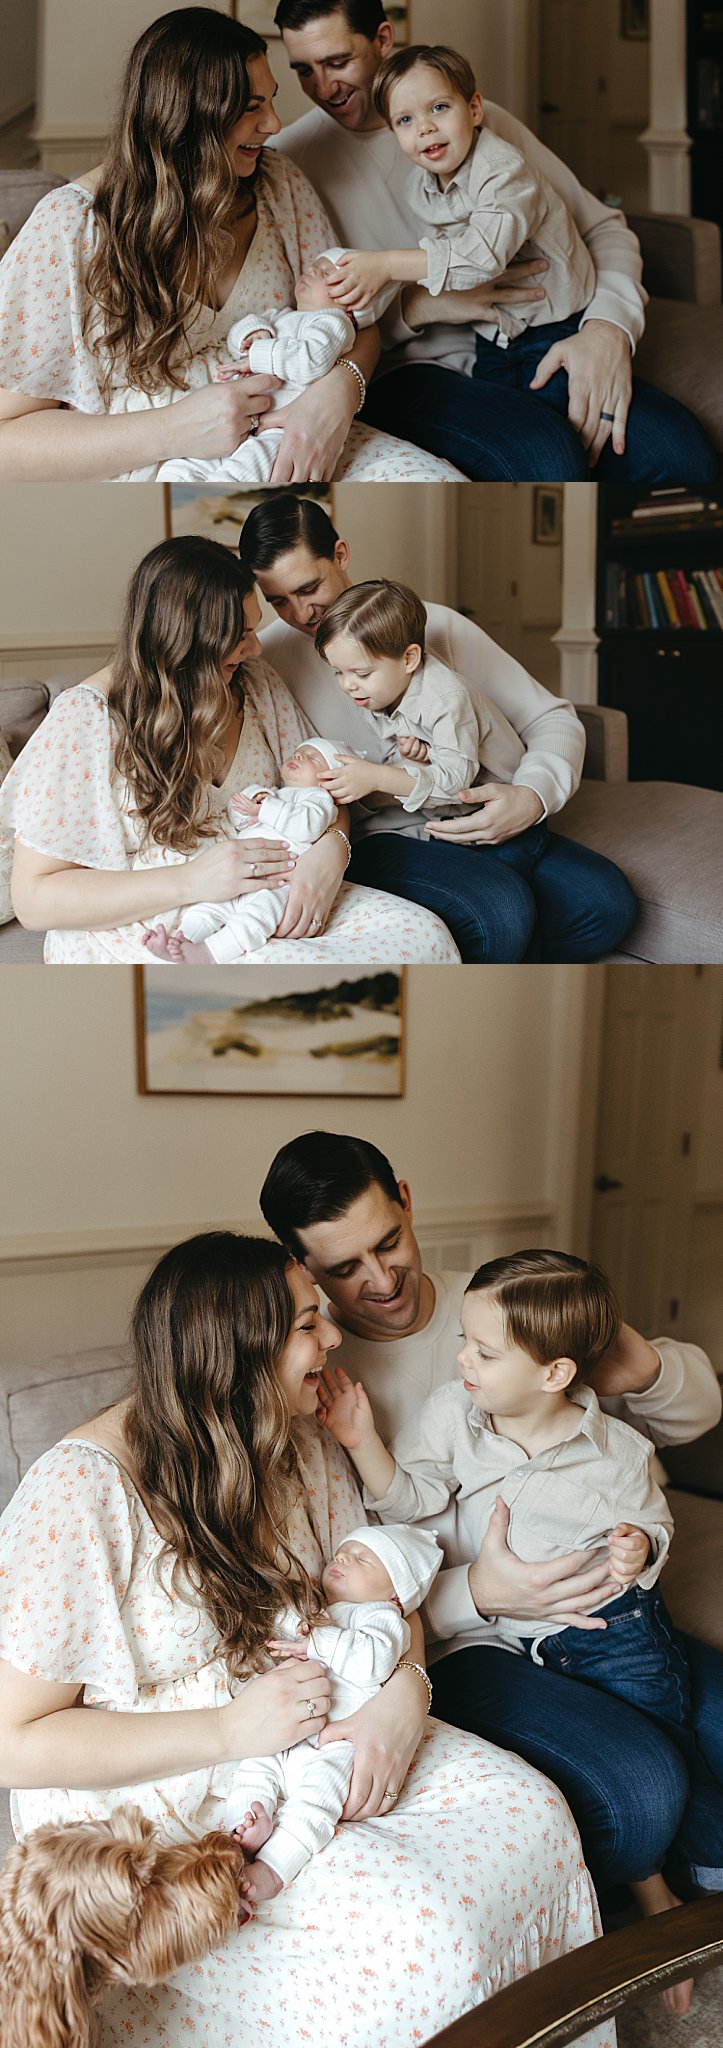 family gathers together on couch by Virginia Beach photographer